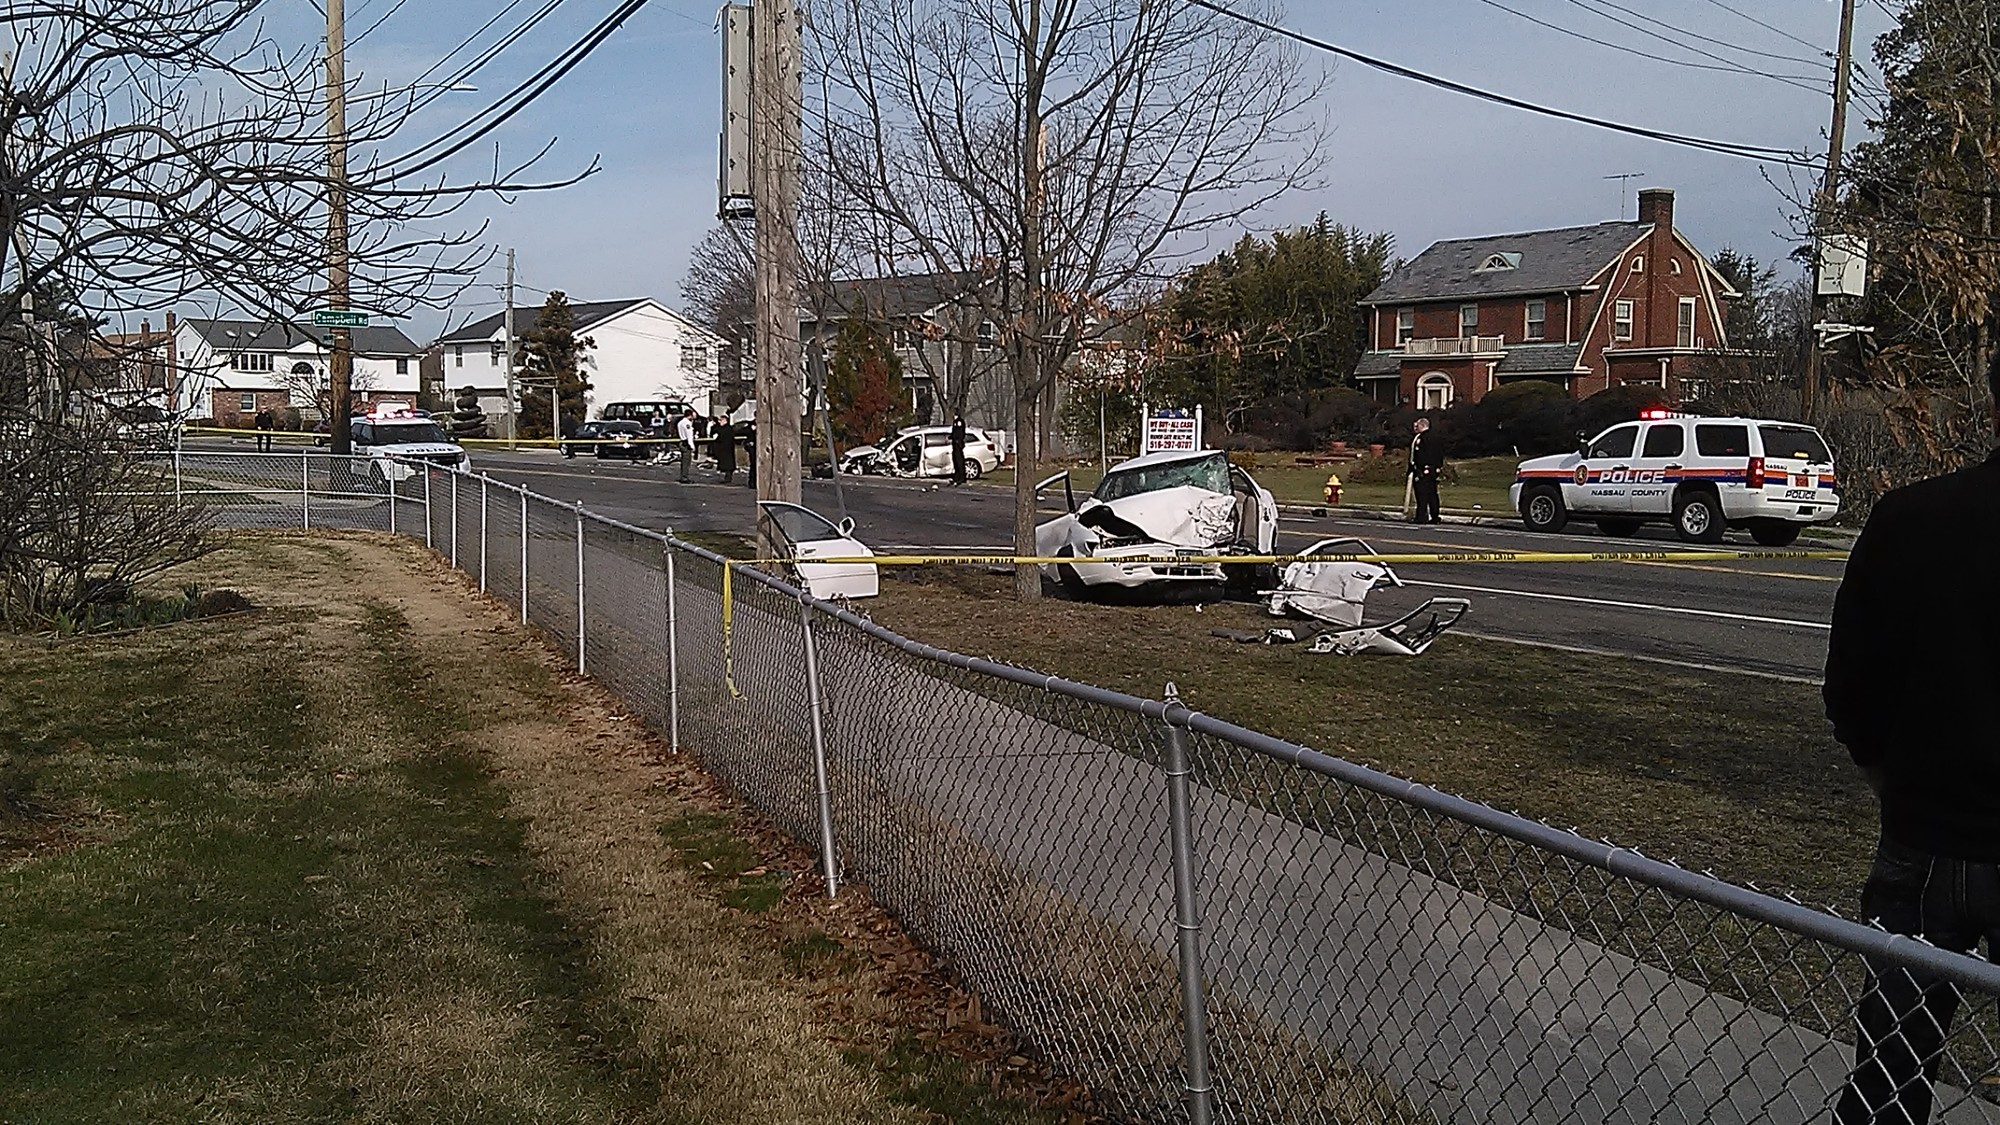 One person died in a two-car accident on Jerusalem Avenue in Wantagh last Sunday morning.